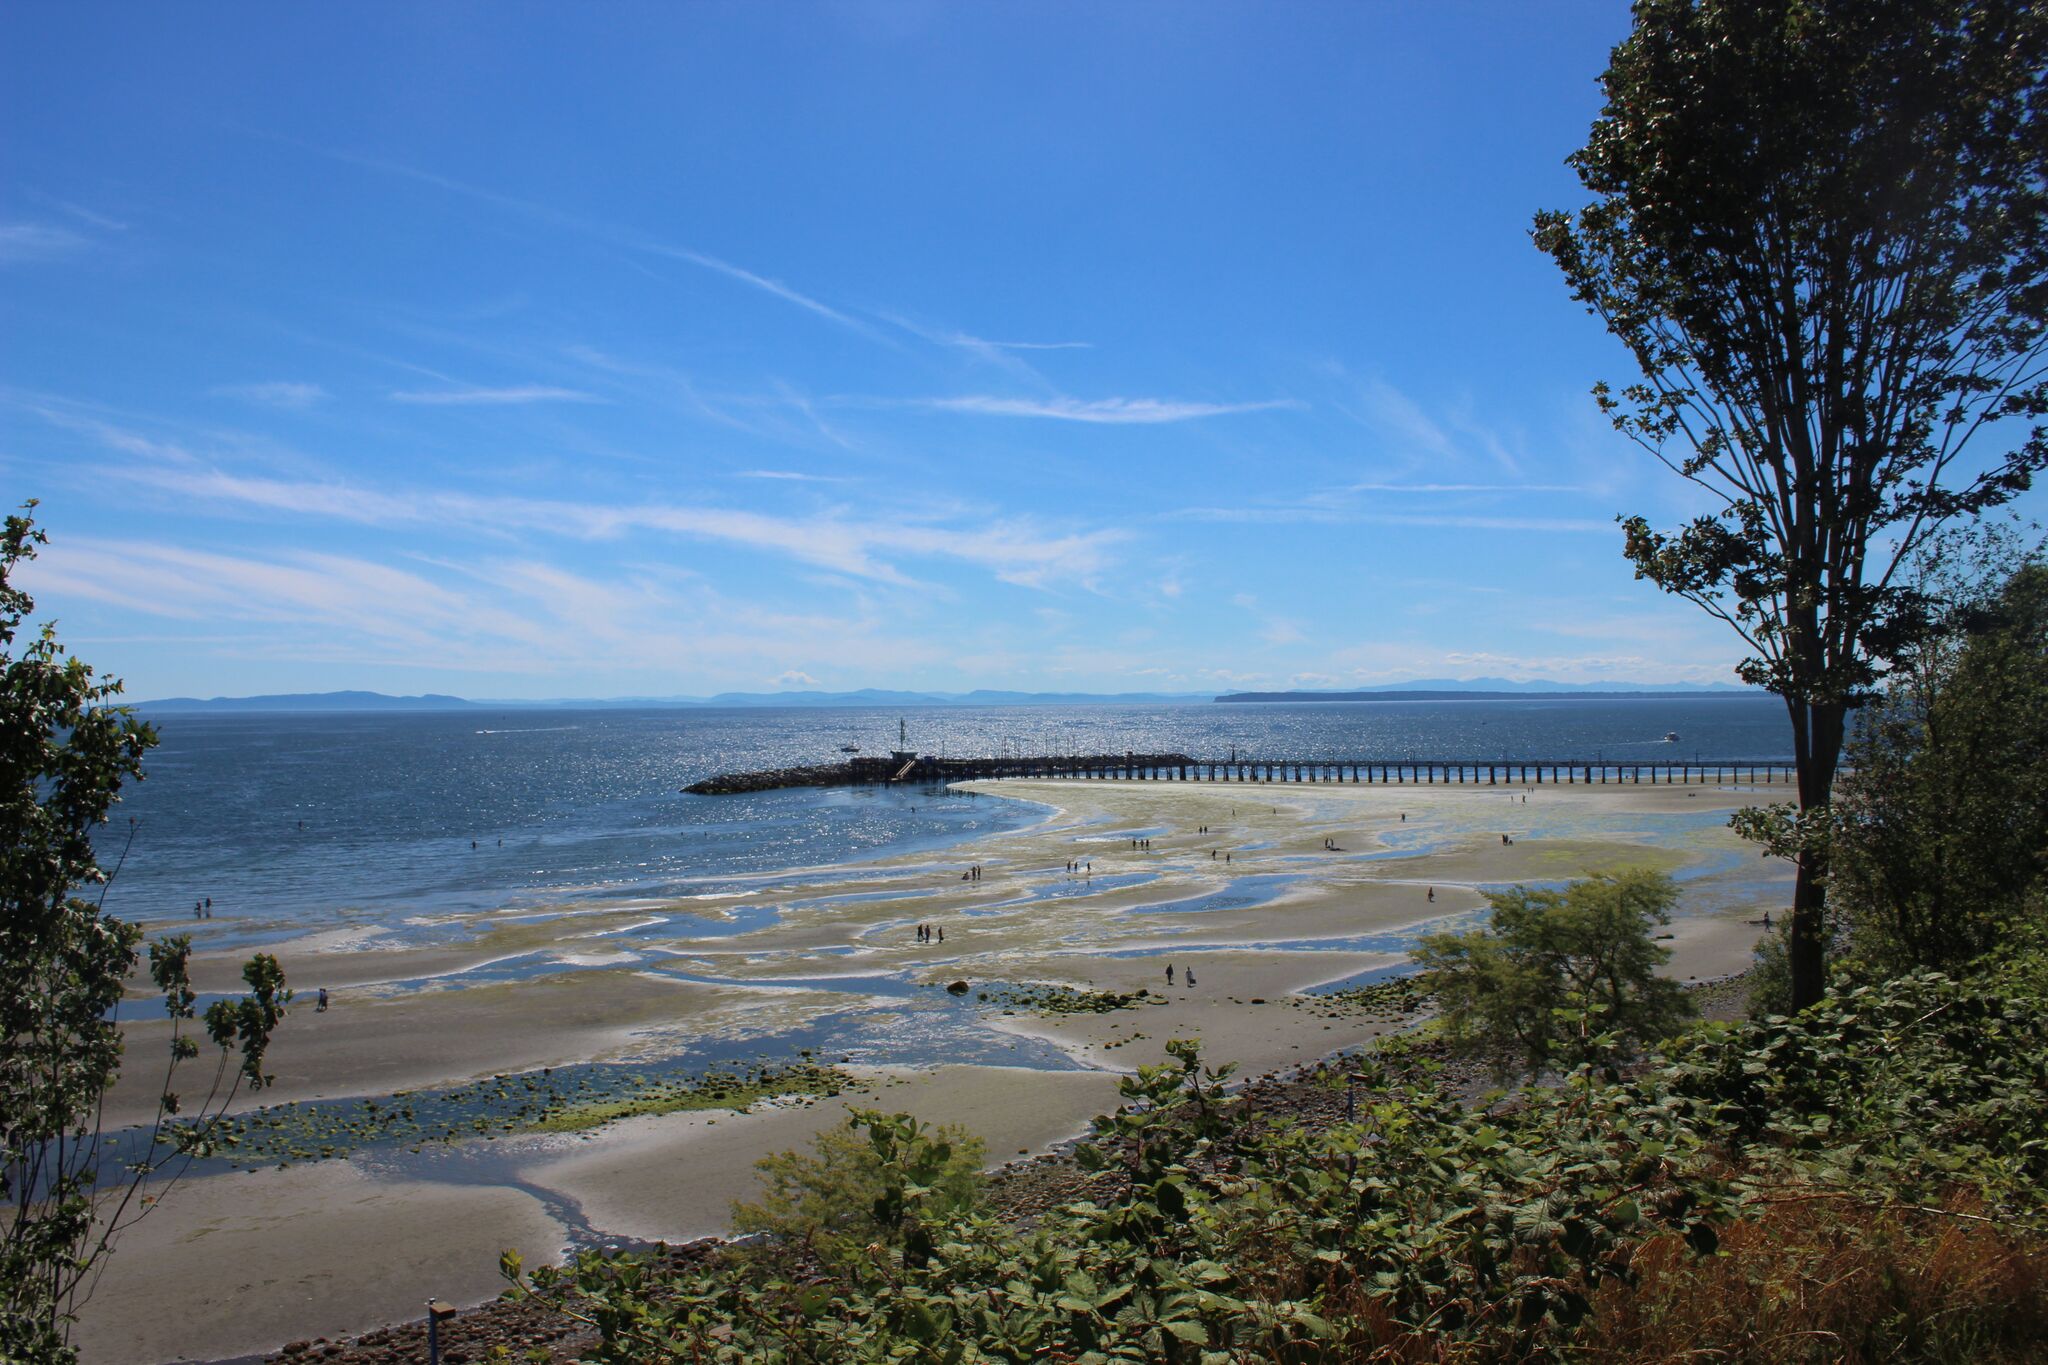 Low Tide: What You'll Find - Explore White Rock